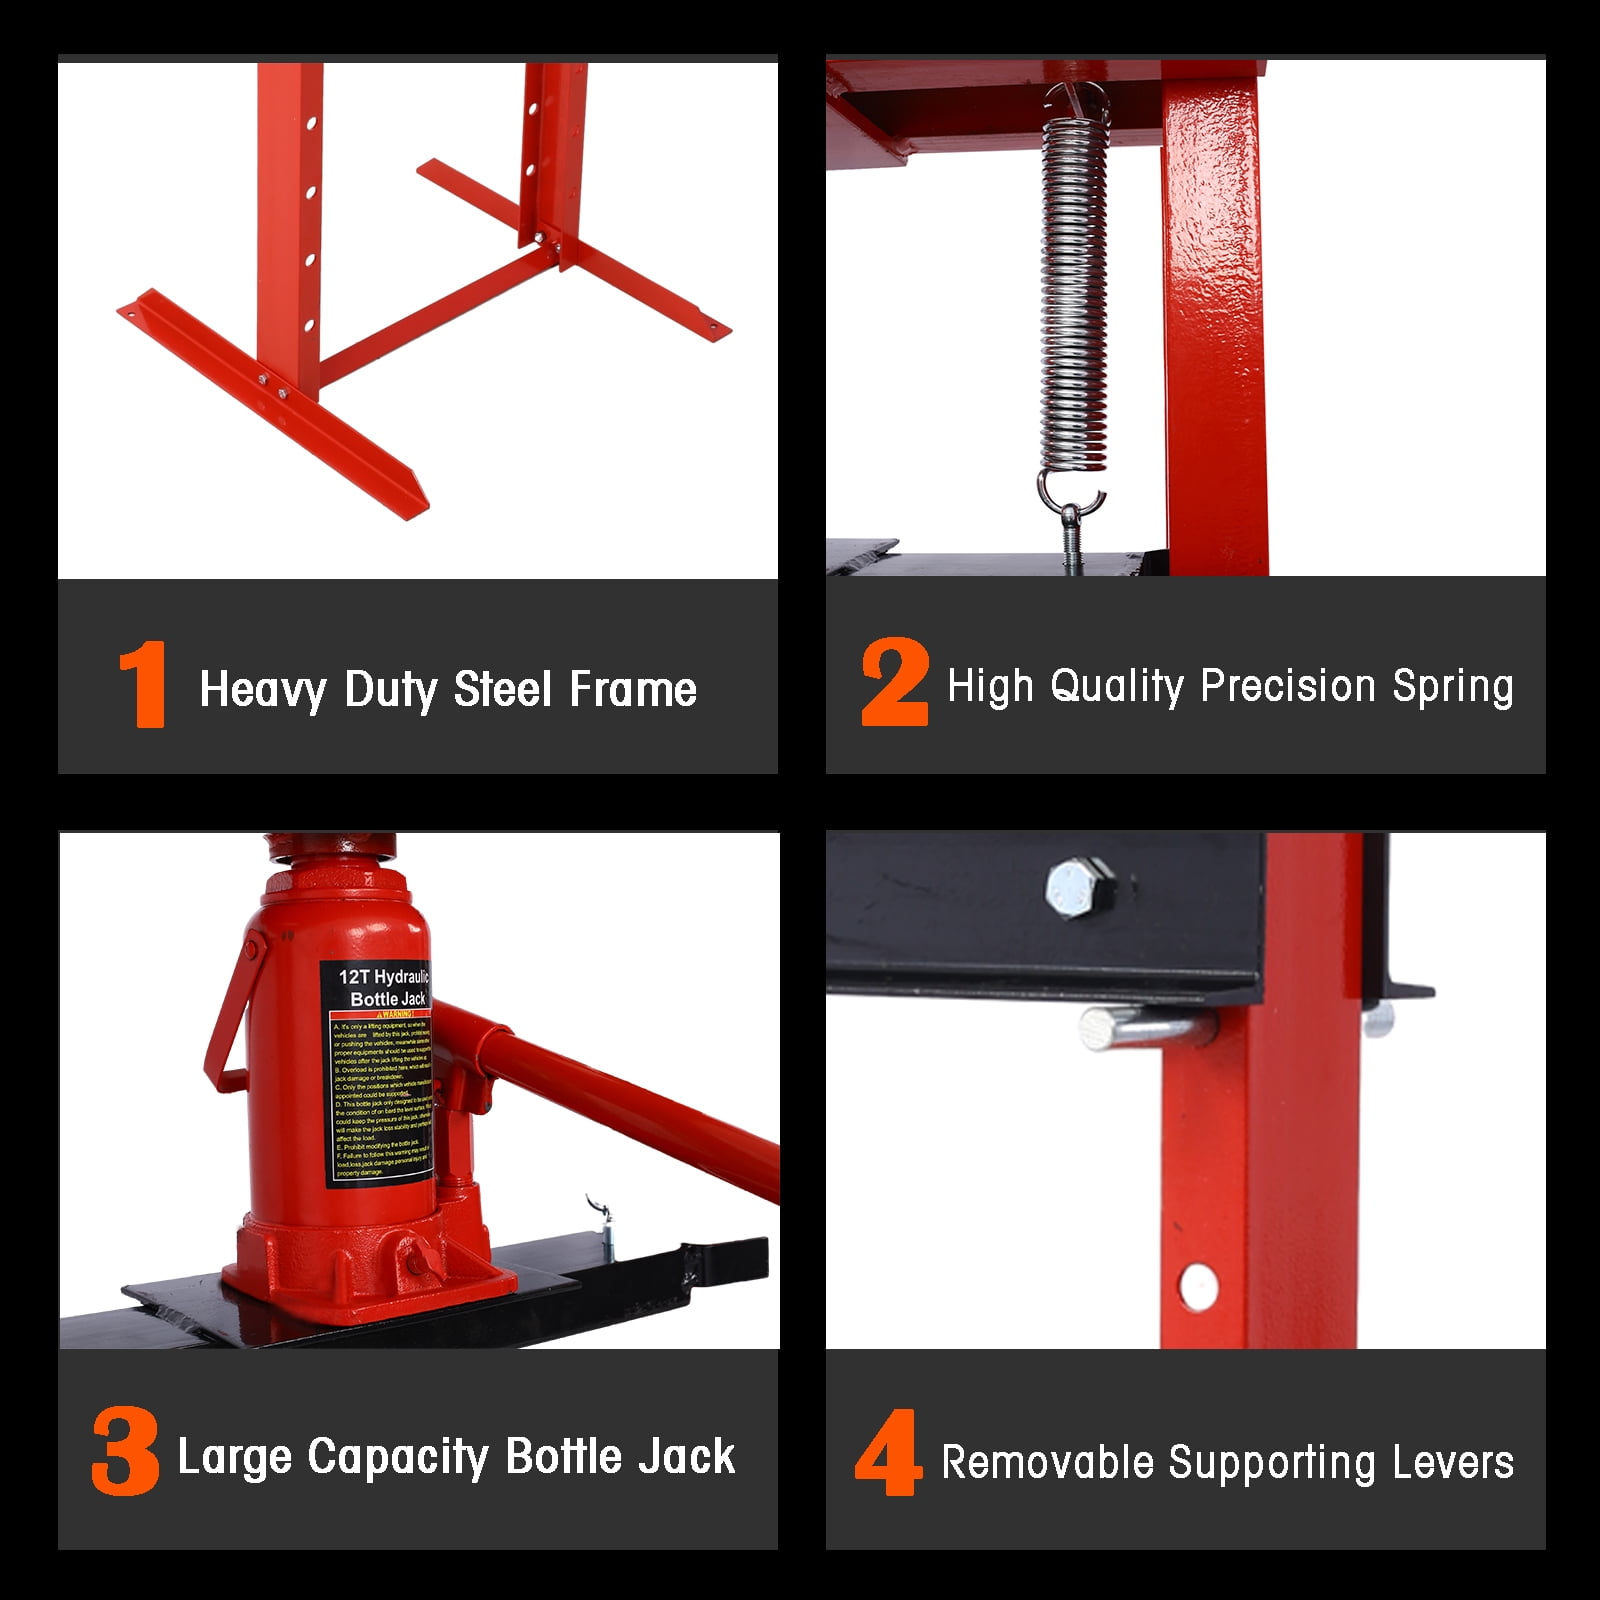 Big Red 12-Ton Shop Press with Stamping Plates T51201 - The Home Depot